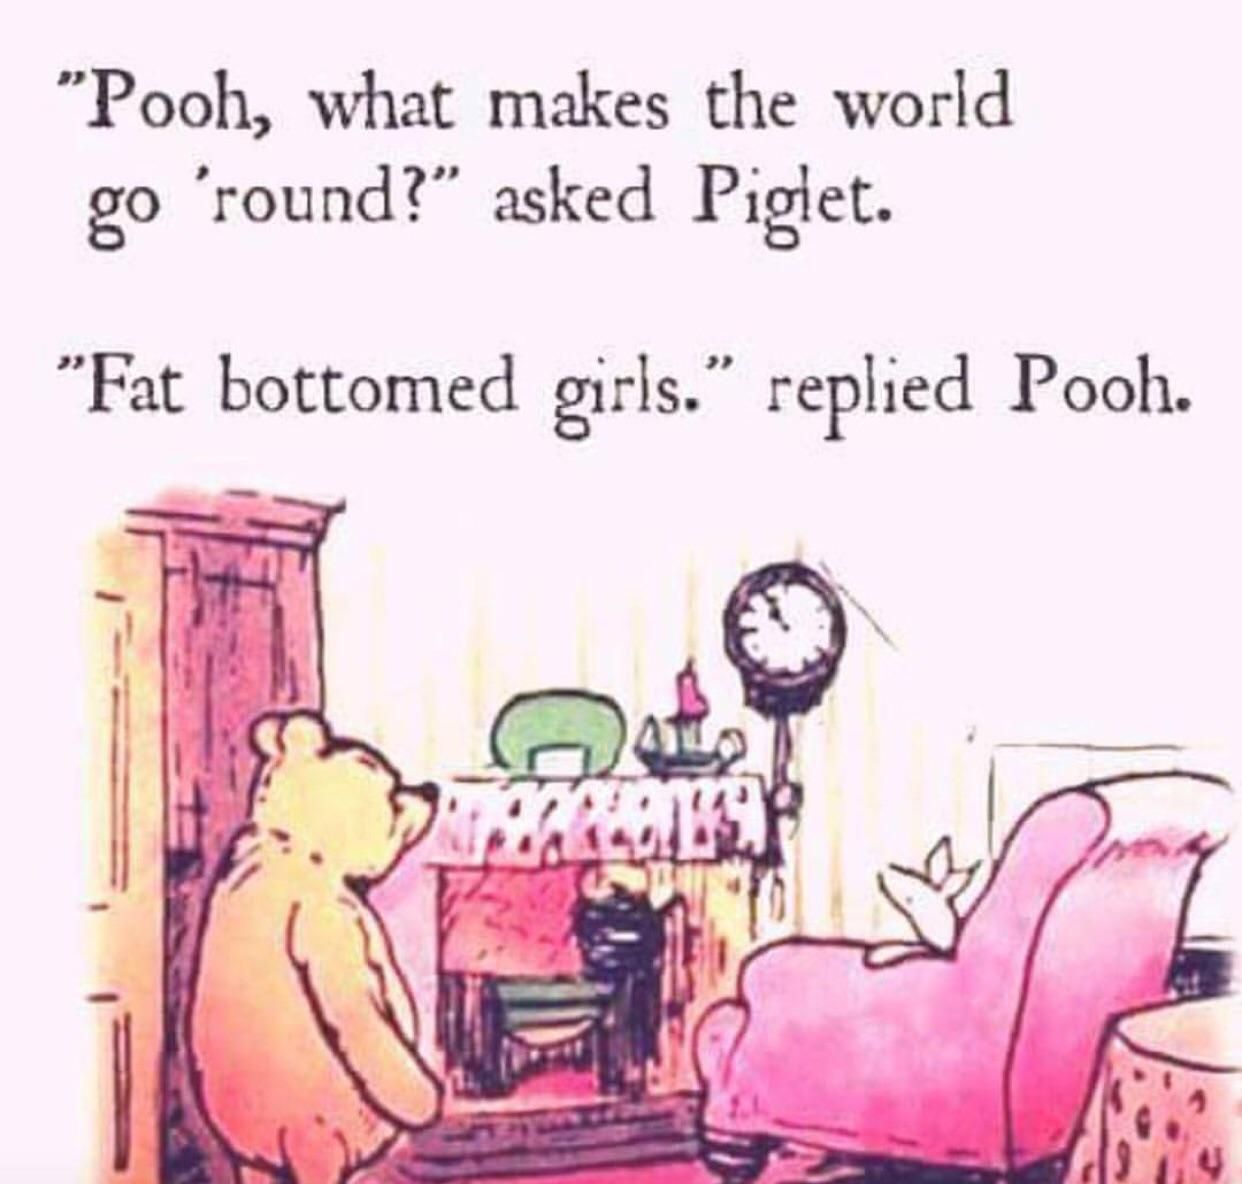 If only we had this version of Winnie the Pooh